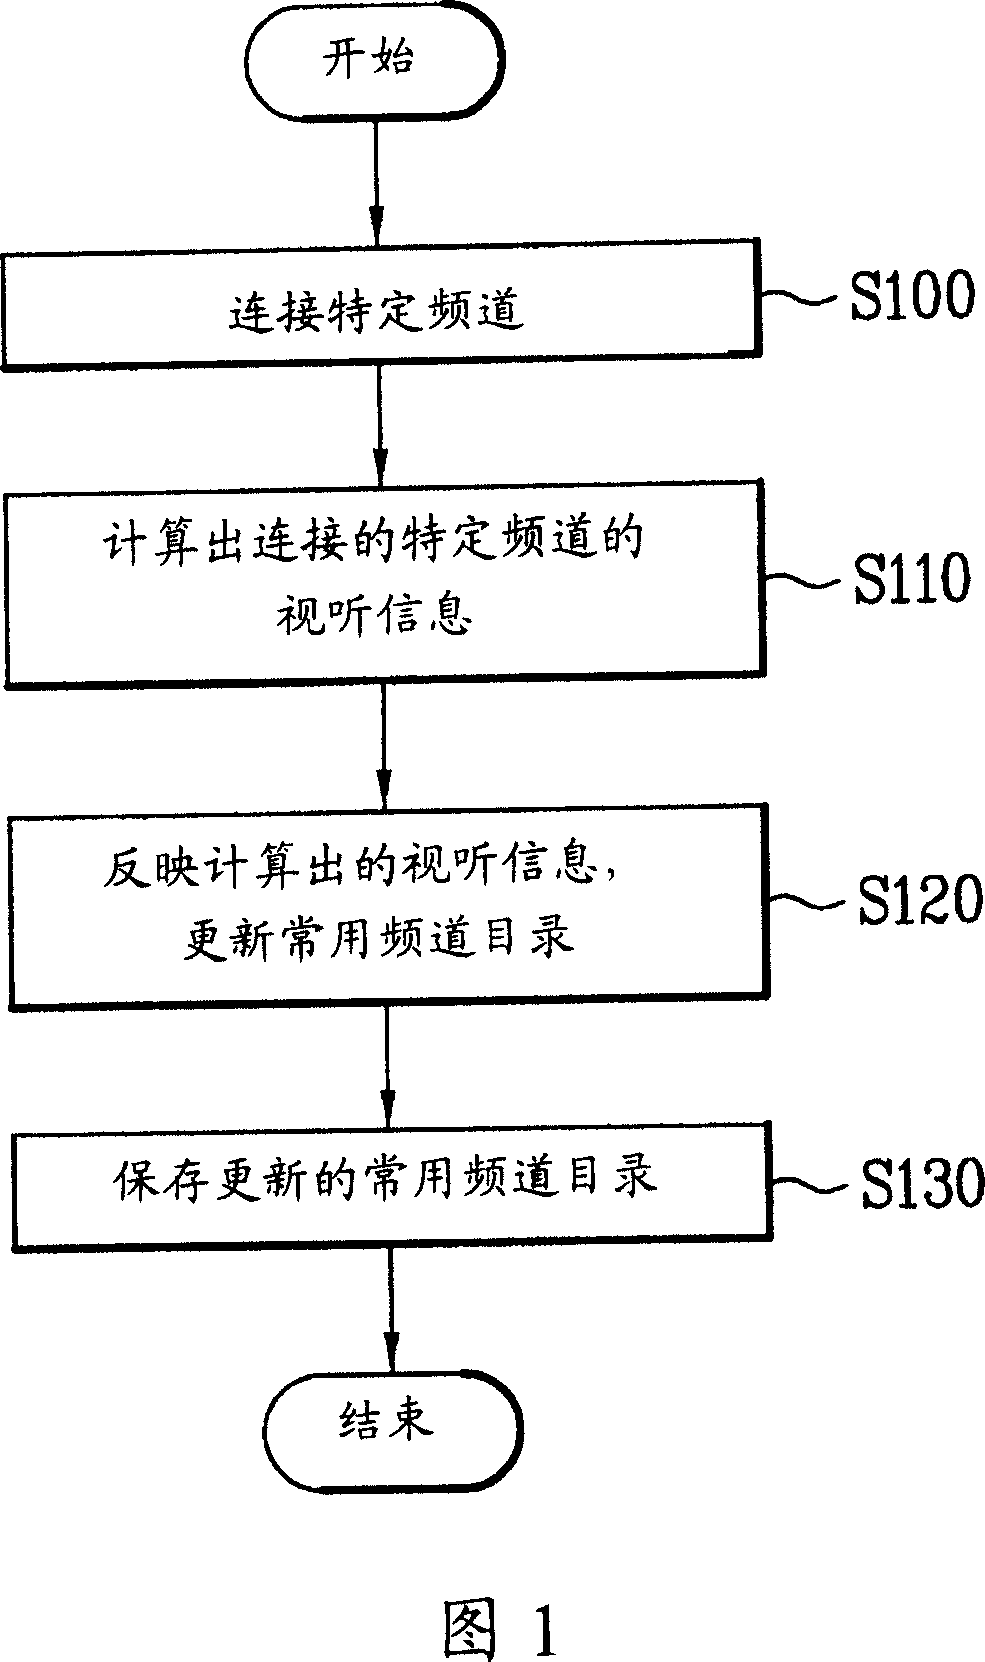 Digital broadcasting terminal with providing list of channels and its method